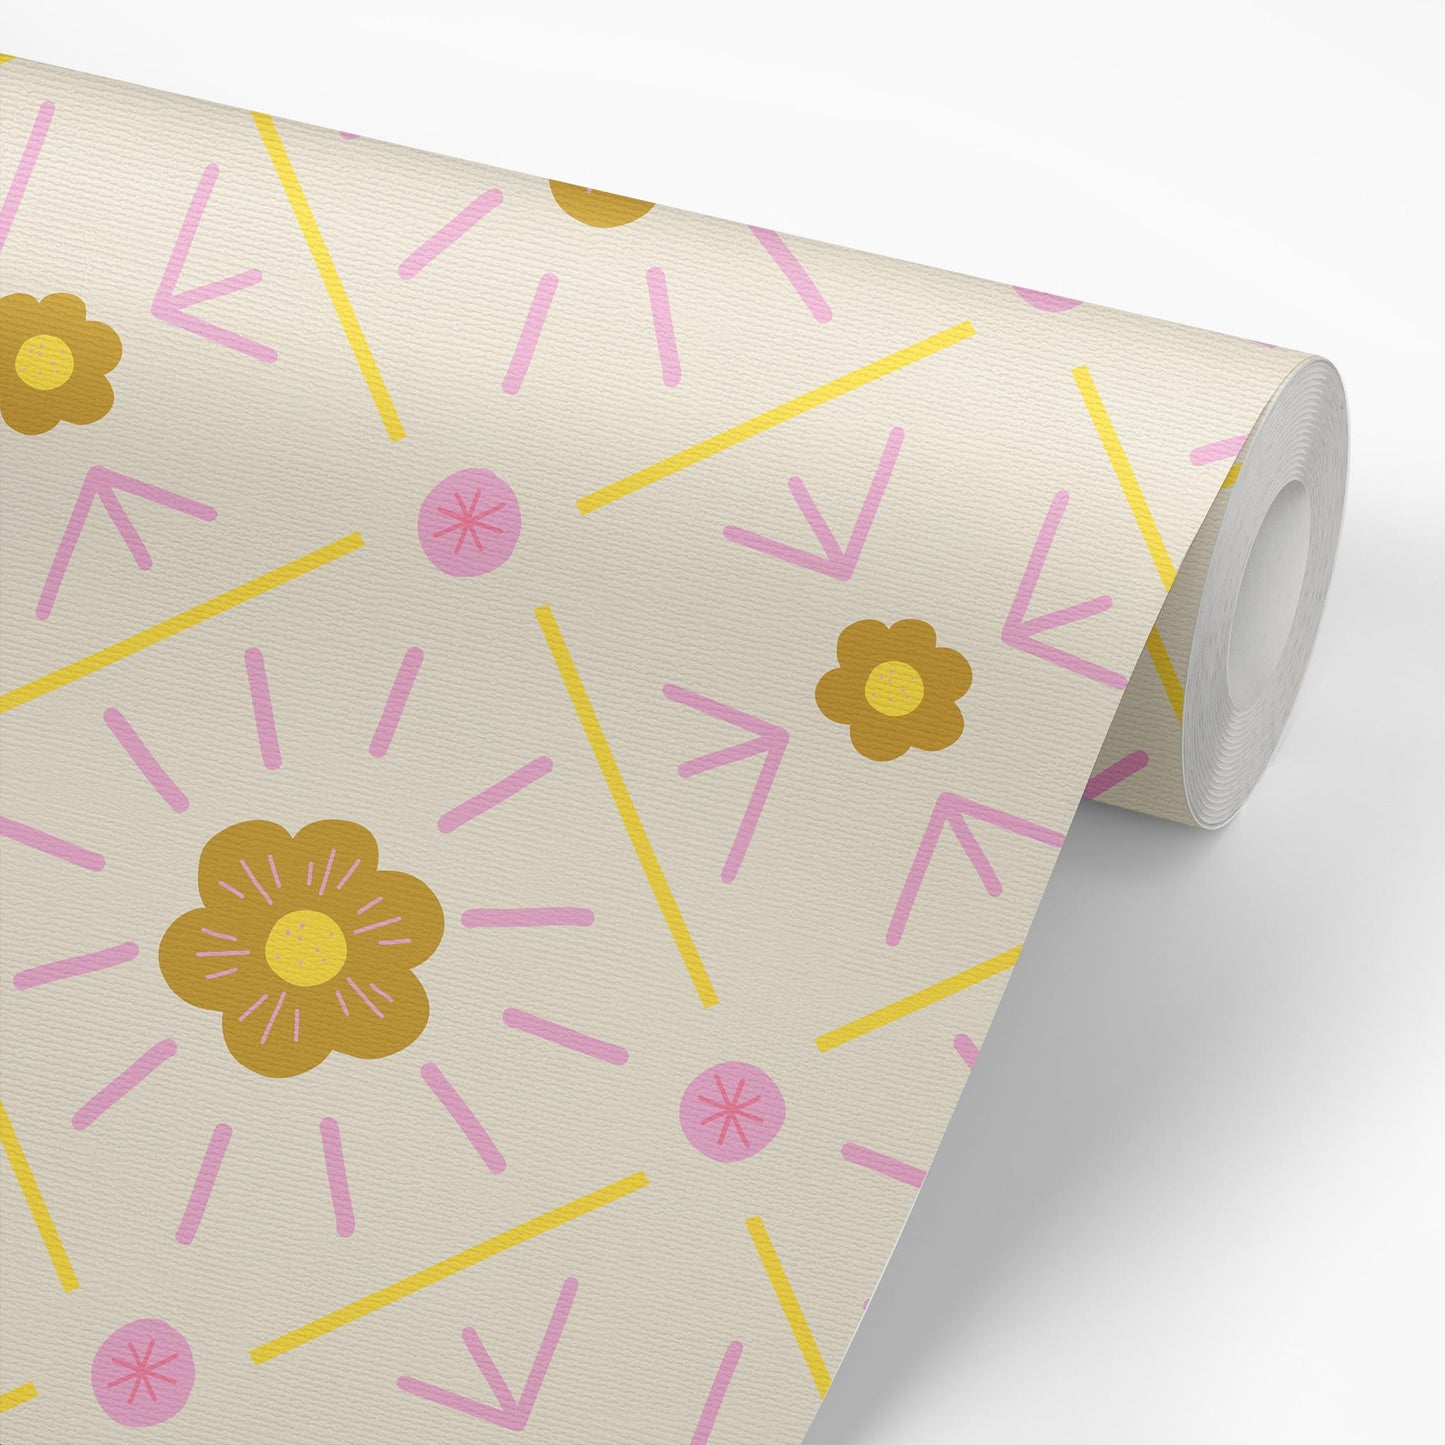 Sample roll of Daisy Squares Wallpaper in Green and Yellow by artist Brenda Bird